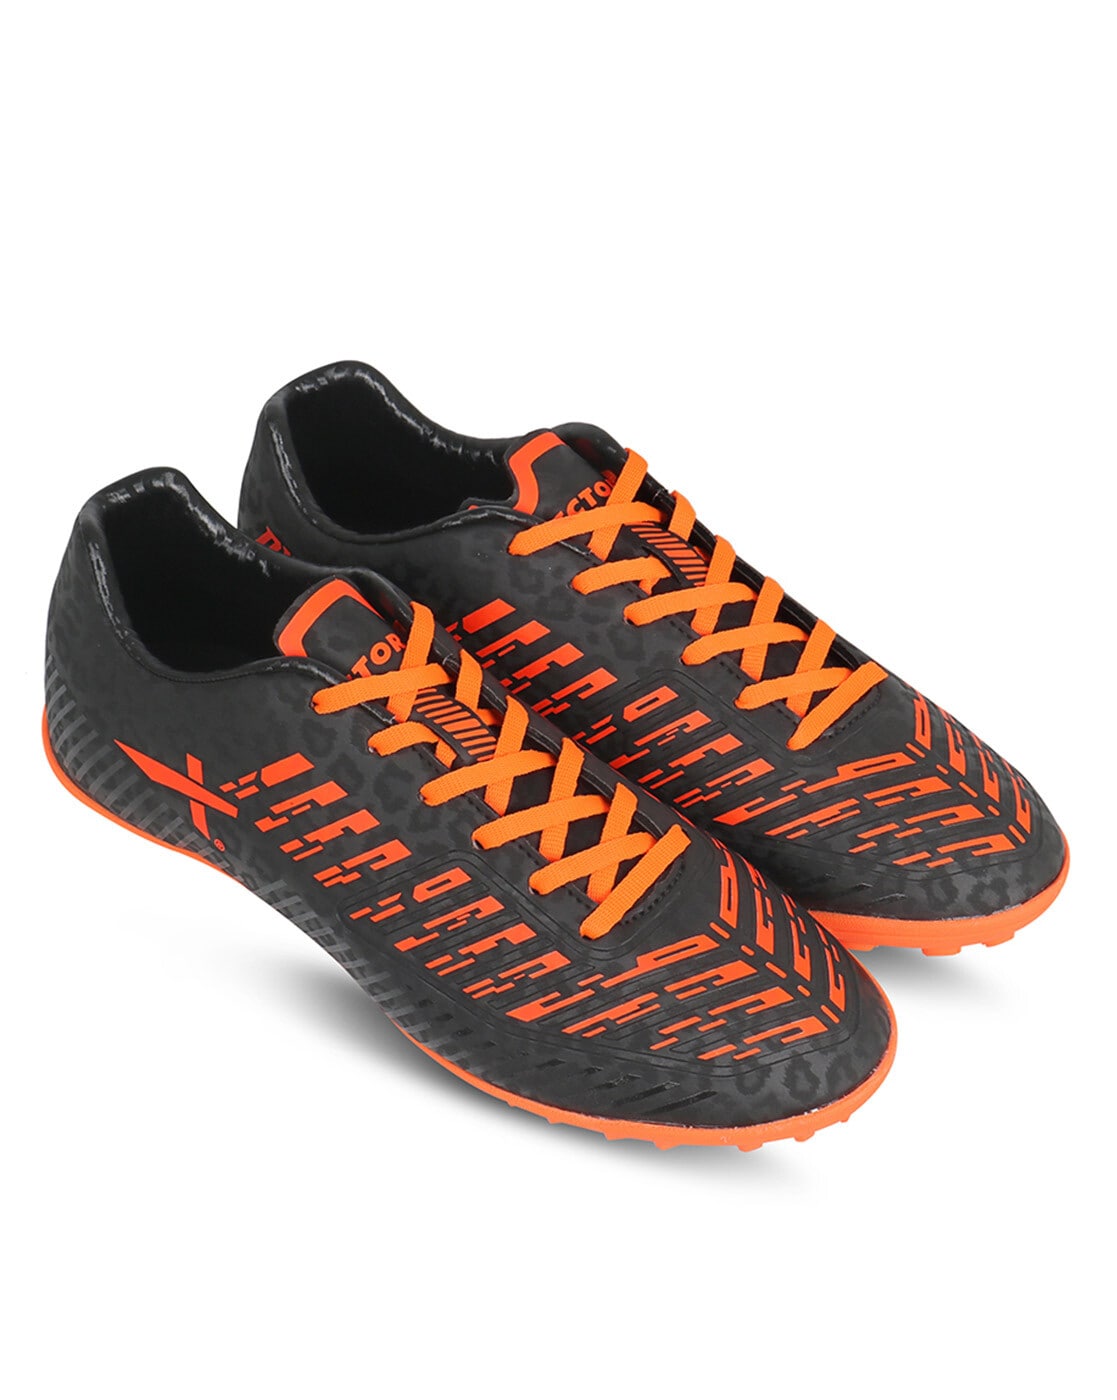 ADIDAS X 22.4 FxG Football Shoes For Men - Buy ADIDAS X 22.4 FxG Football  Shoes For Men Online at Best Price - Shop Online for Footwears in India |  Flipkart.com